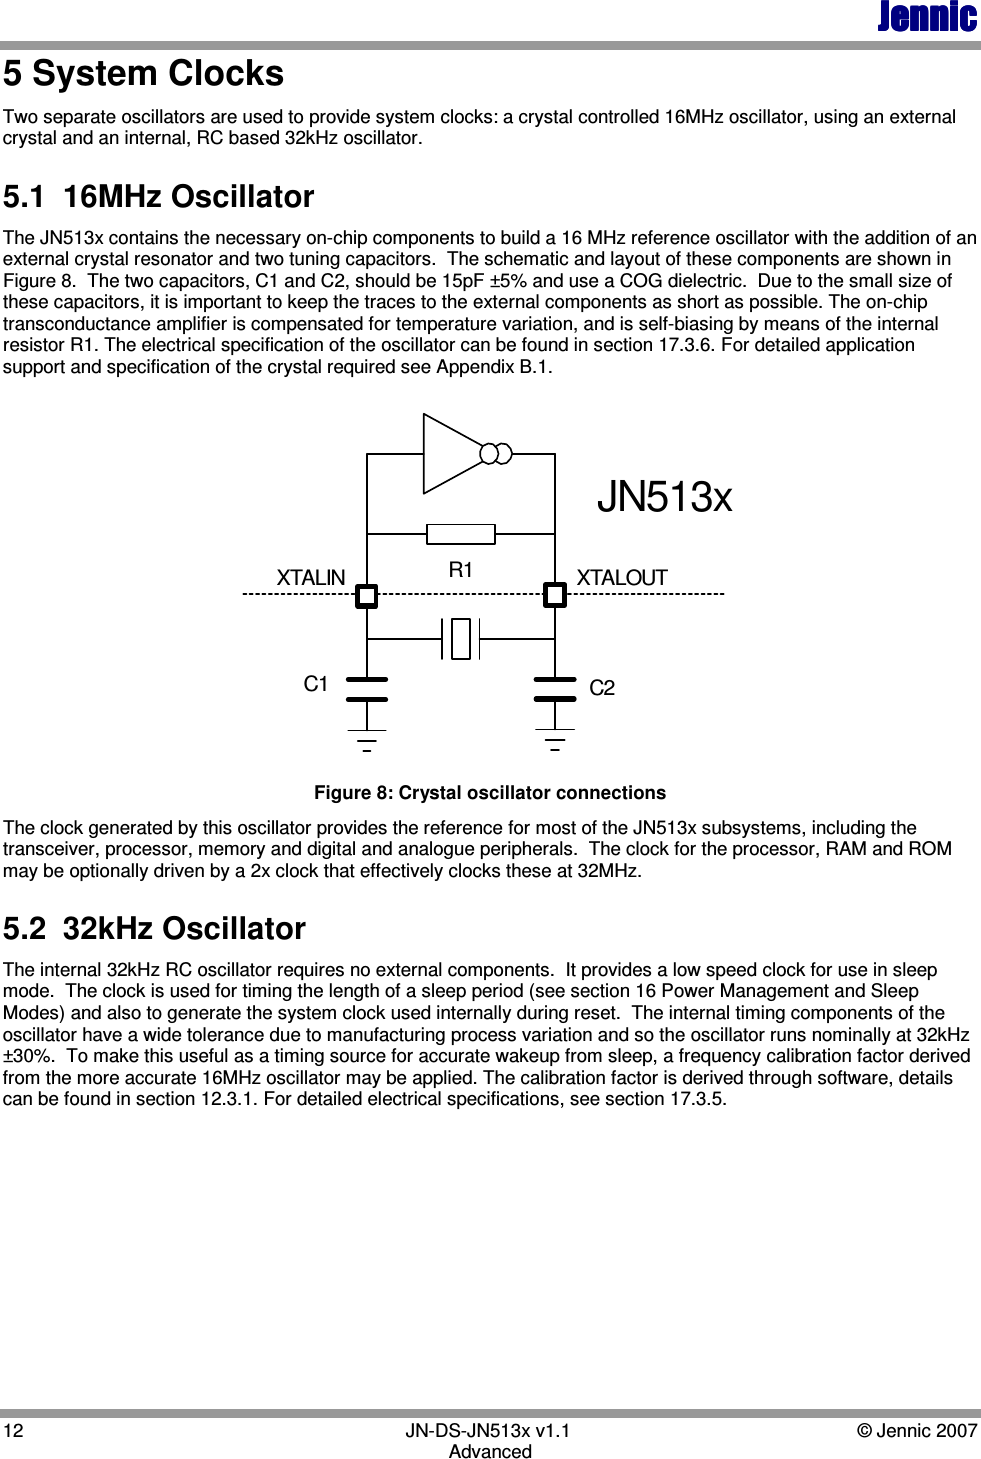 JennicJennicJennicJennic 12        JN-DS-JN513x v1.1  © Jennic 2007 Advanced 5 System Clocks Two separate oscillators are used to provide system clocks: a crystal controlled 16MHz oscillator, using an external crystal and an internal, RC based 32kHz oscillator. 5.1  16MHz Oscillator The JN513x contains the necessary on-chip components to build a 16 MHz reference oscillator with the addition of an external crystal resonator and two tuning capacitors.  The schematic and layout of these components are shown in Figure 8.  The two capacitors, C1 and C2, should be 15pF ±5% and use a COG dielectric.  Due to the small size of these capacitors, it is important to keep the traces to the external components as short as possible. The on-chip transconductance amplifier is compensated for temperature variation, and is self-biasing by means of the internal resistor R1. The electrical specification of the oscillator can be found in section 17.3.6. For detailed application support and specification of the crystal required see Appendix B.1. XTALOUTC2C1R1XTALINJN513x Figure 8: Crystal oscillator connections  The clock generated by this oscillator provides the reference for most of the JN513x subsystems, including the transceiver, processor, memory and digital and analogue peripherals.  The clock for the processor, RAM and ROM may be optionally driven by a 2x clock that effectively clocks these at 32MHz. 5.2  32kHz Oscillator The internal 32kHz RC oscillator requires no external components.  It provides a low speed clock for use in sleep mode.  The clock is used for timing the length of a sleep period (see section 16 Power Management and Sleep Modes) and also to generate the system clock used internally during reset.  The internal timing components of the oscillator have a wide tolerance due to manufacturing process variation and so the oscillator runs nominally at 32kHz ±30%.  To make this useful as a timing source for accurate wakeup from sleep, a frequency calibration factor derived from the more accurate 16MHz oscillator may be applied. The calibration factor is derived through software, details can be found in section 12.3.1. For detailed electrical specifications, see section 17.3.5.  